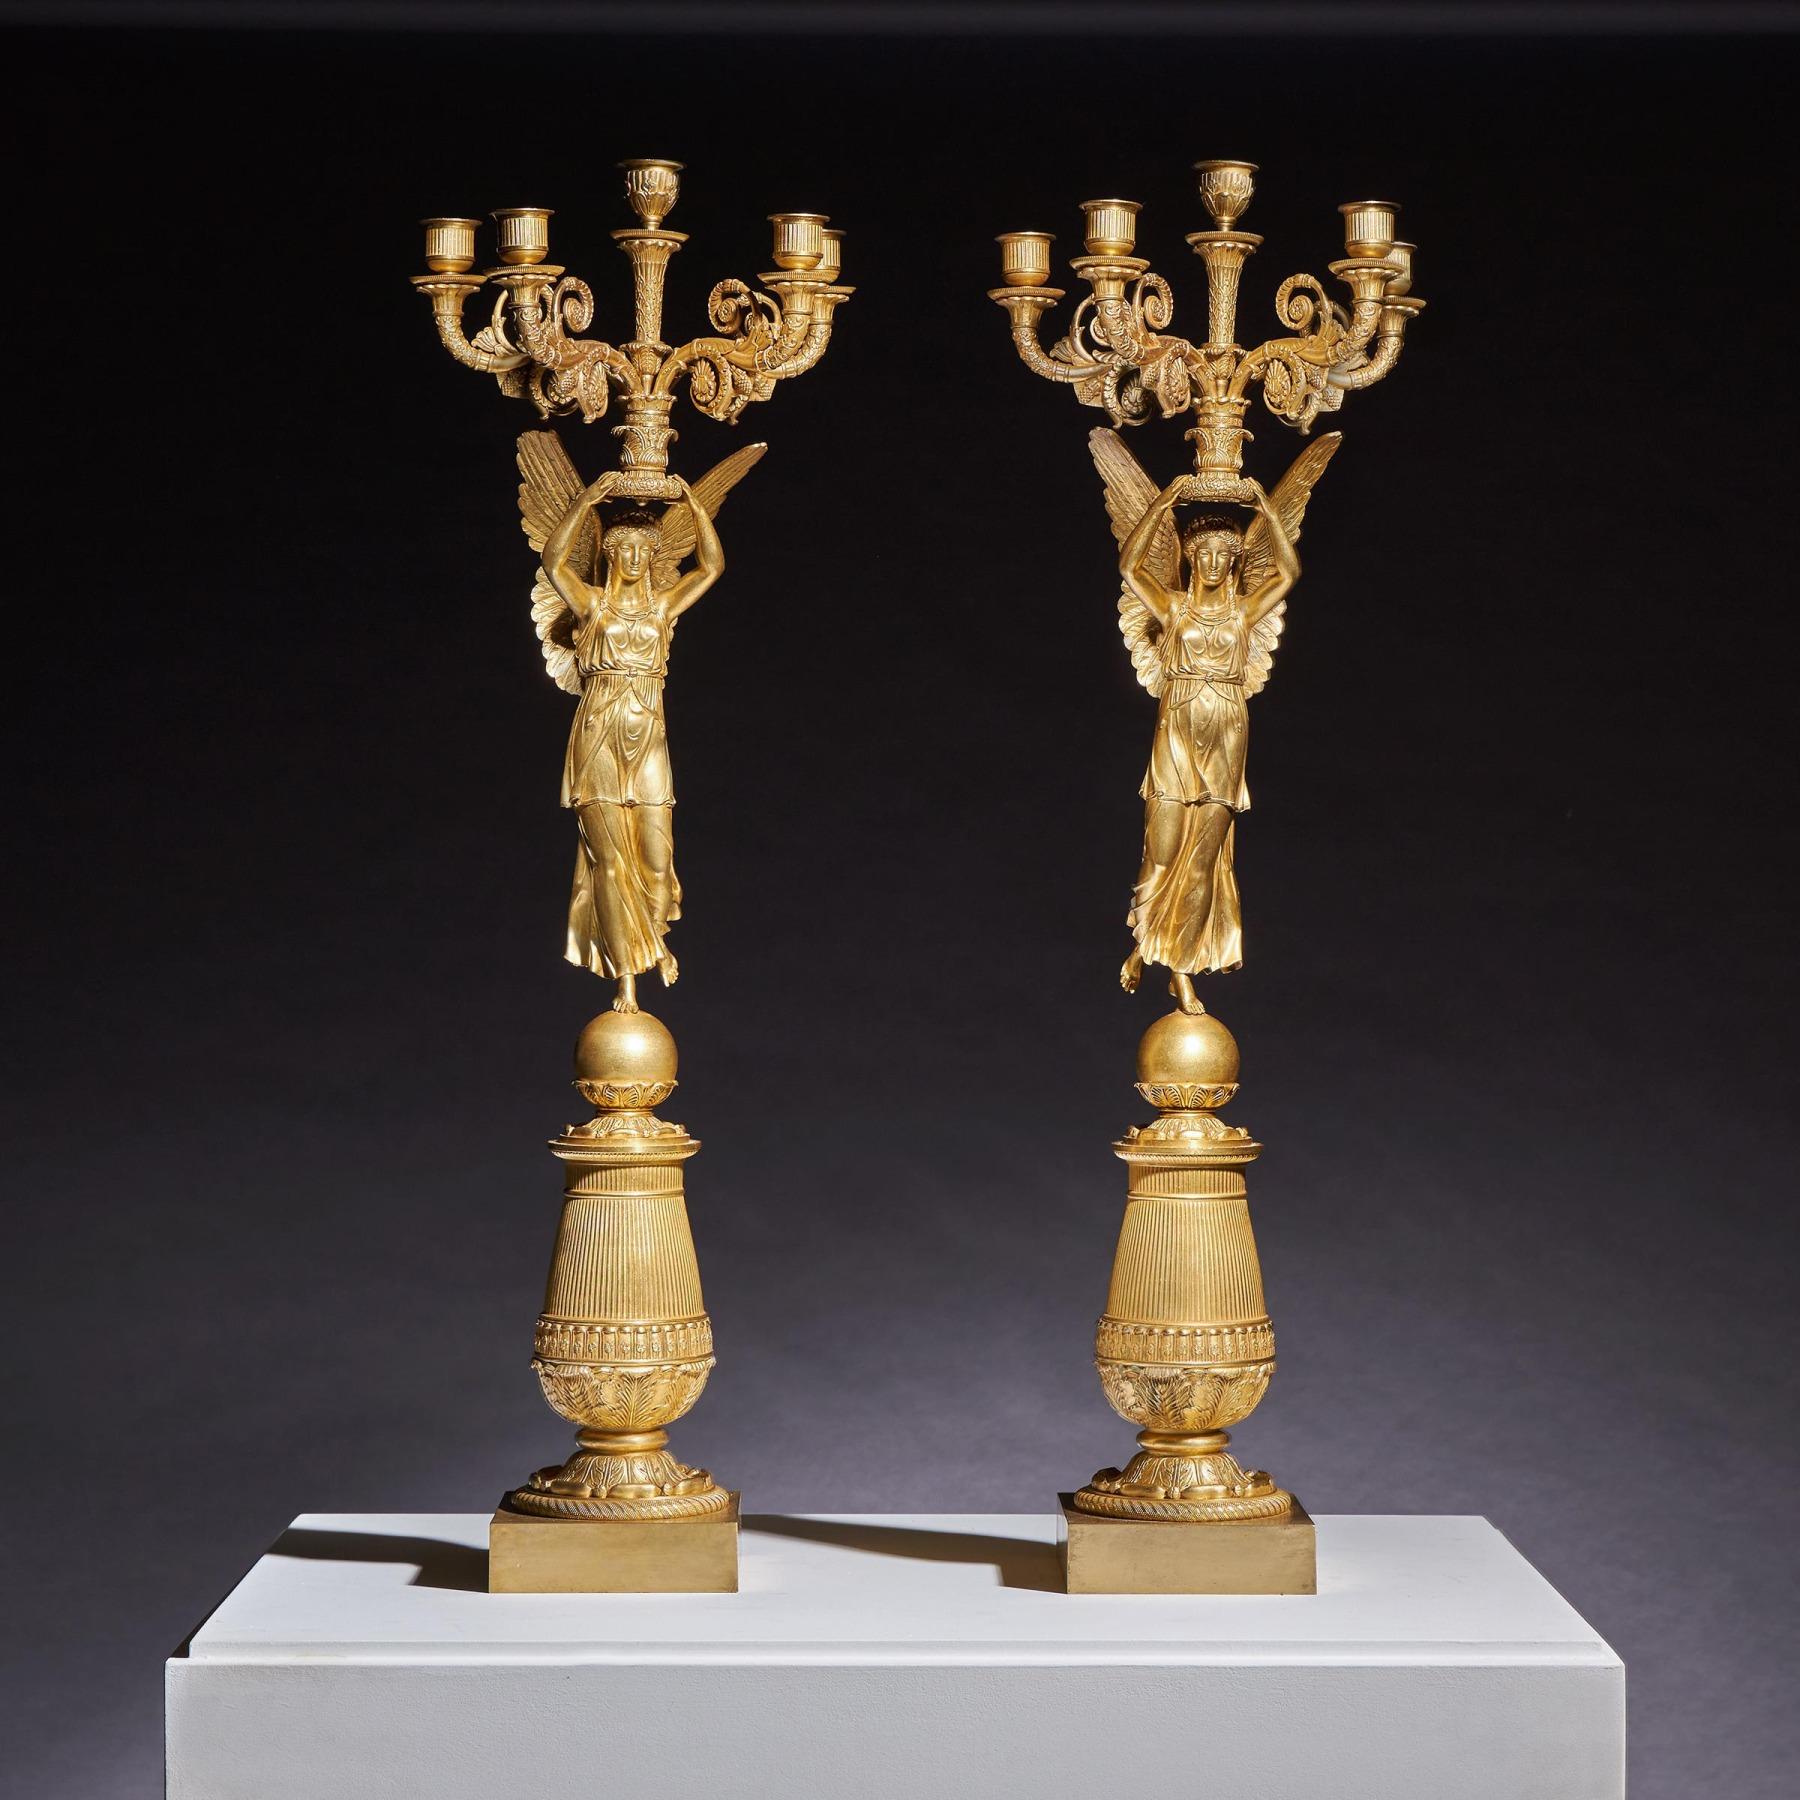 A pair of exceptionally elegant and important late Empire five-light figural candelabra ‘A la Victoire’ in gilt-bronze, attributed to Pierre-Philippe Thomire, after a design by Charles Percier. Imposing size at 81cm in height.

French Paris